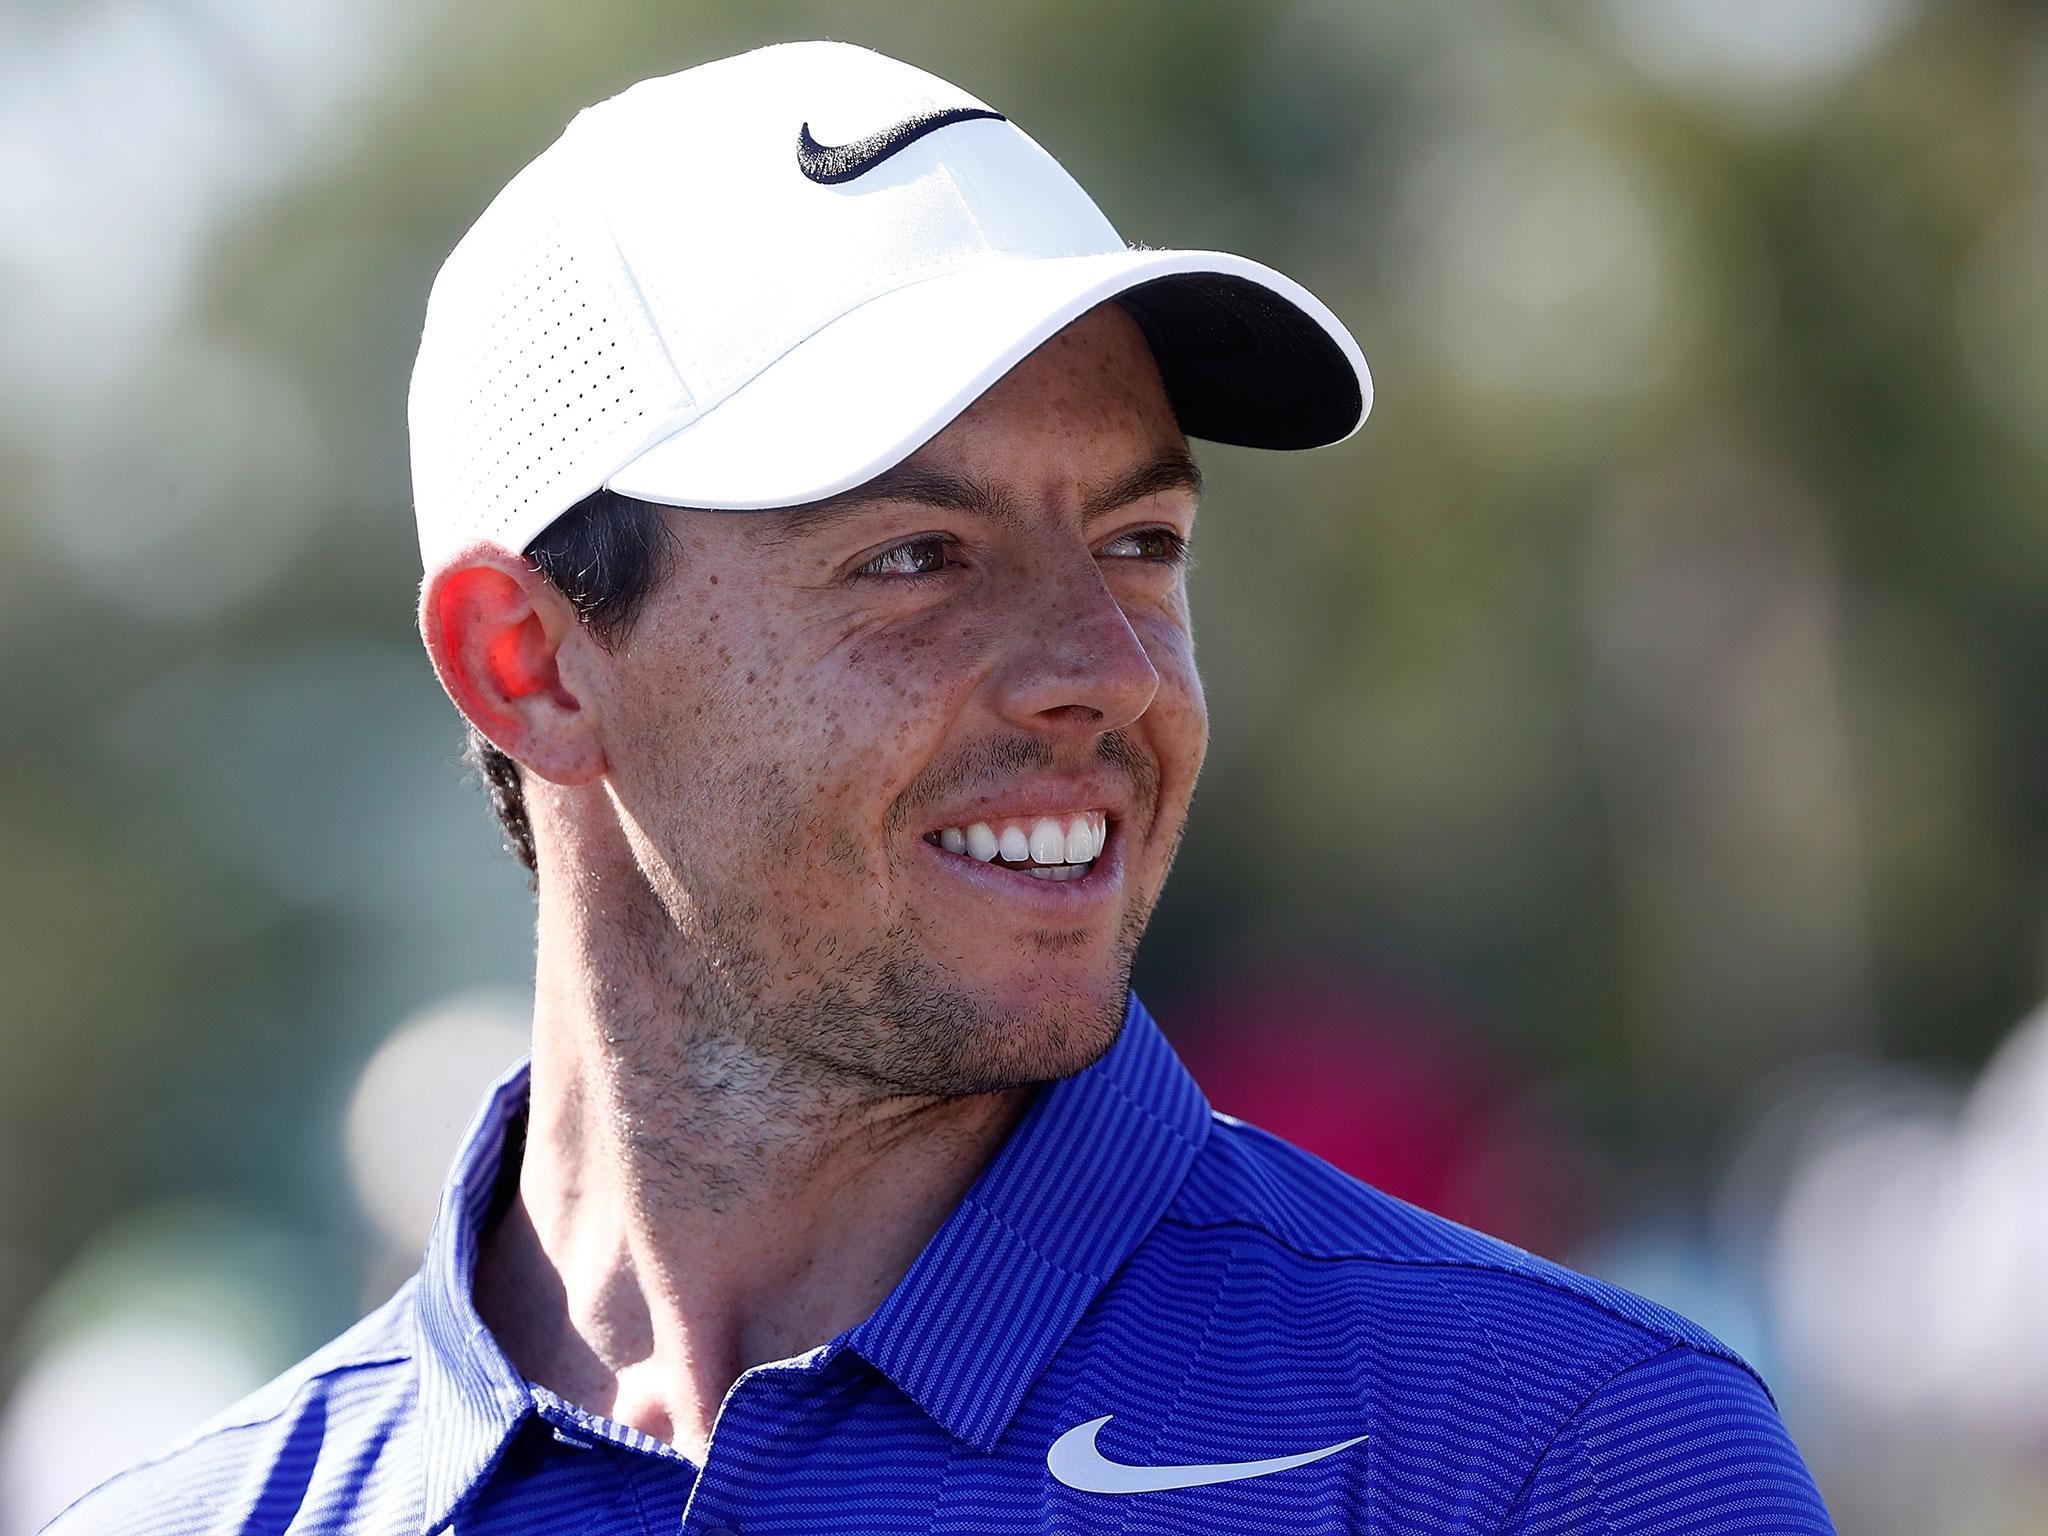 Rory McIlroy is eyeing a first win in the Players Championship at Sawgrass